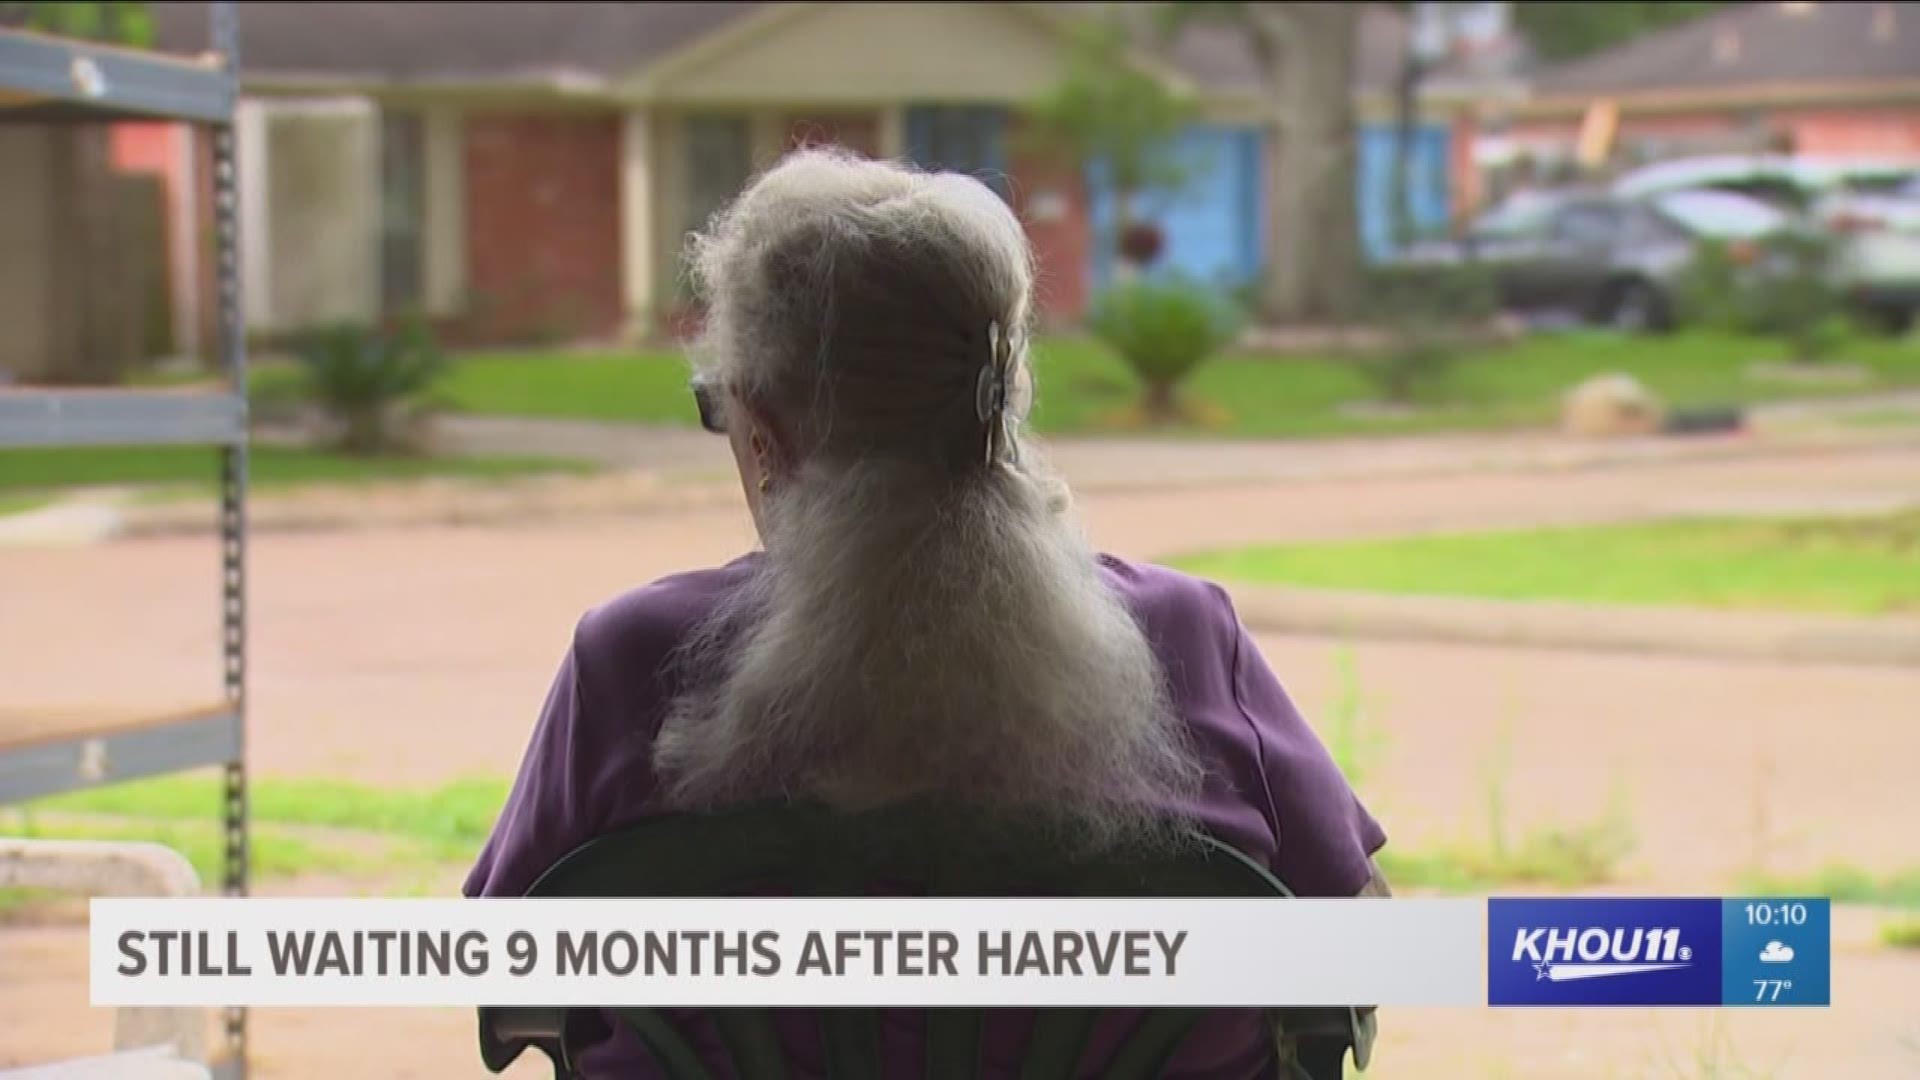 A Harvey victim says contractors want nothing to do with her, because of a selfless act to find her family a home.